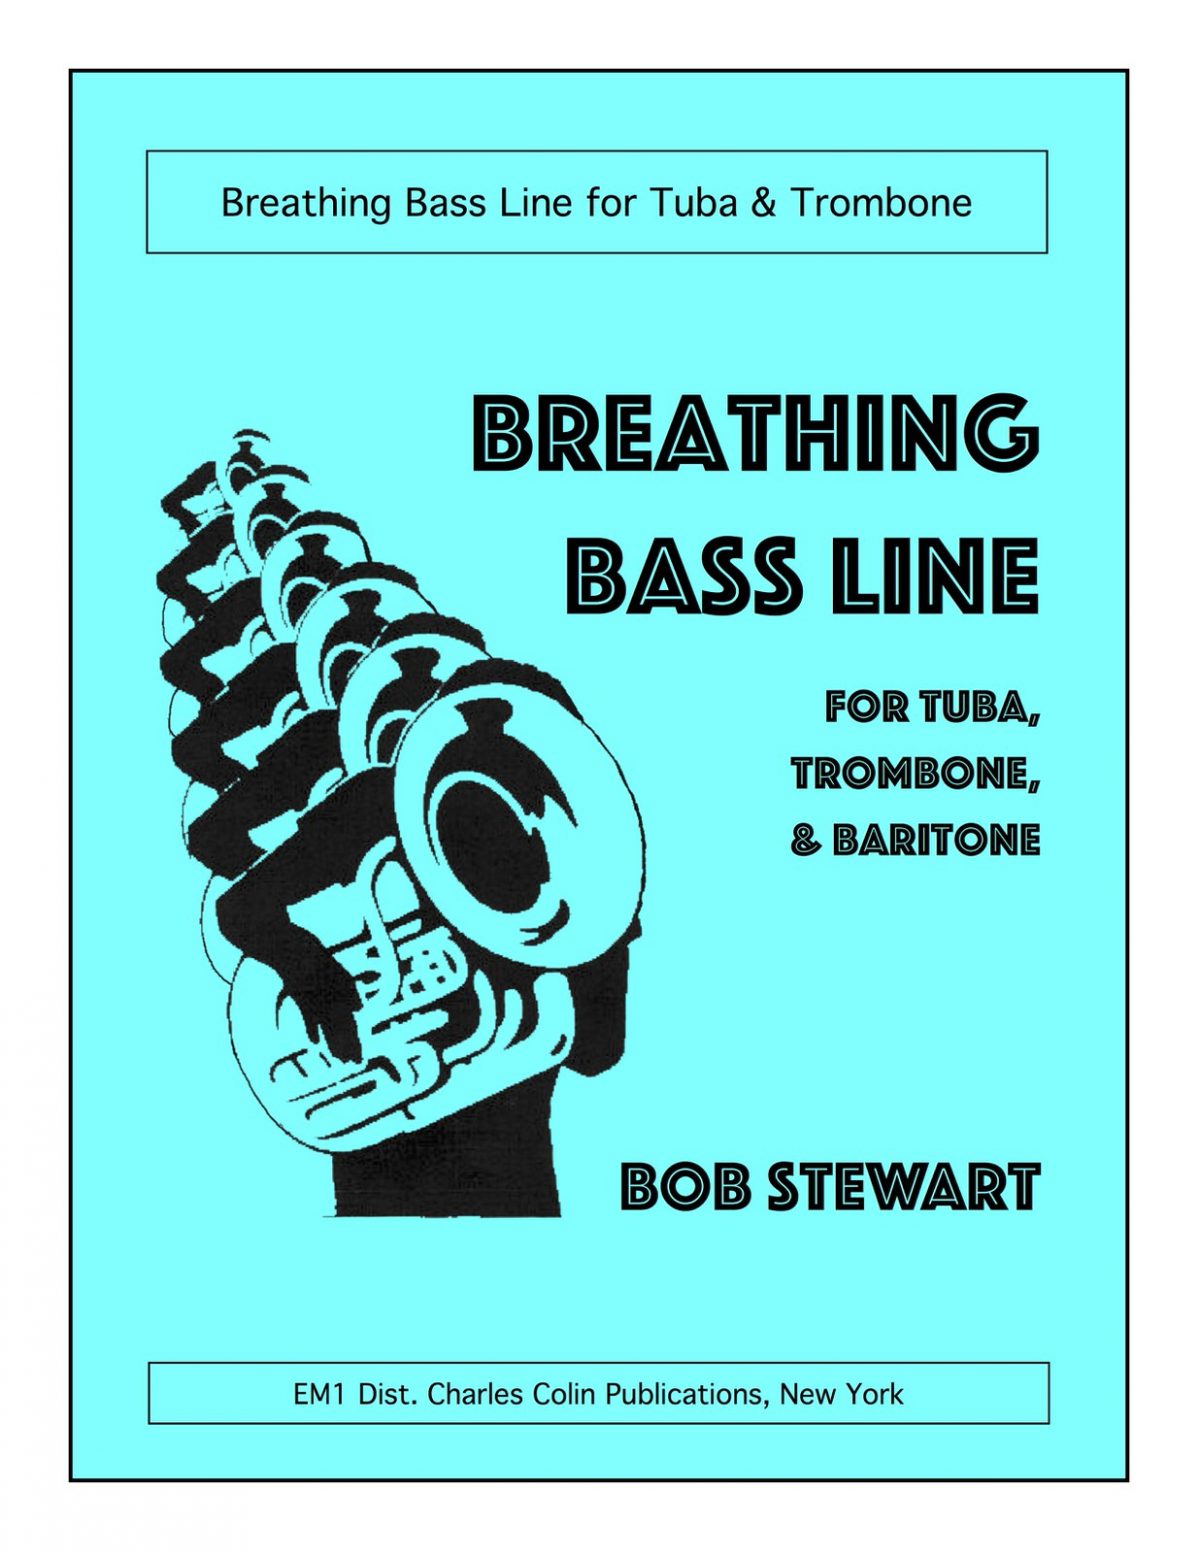 The Breathing Bass Line